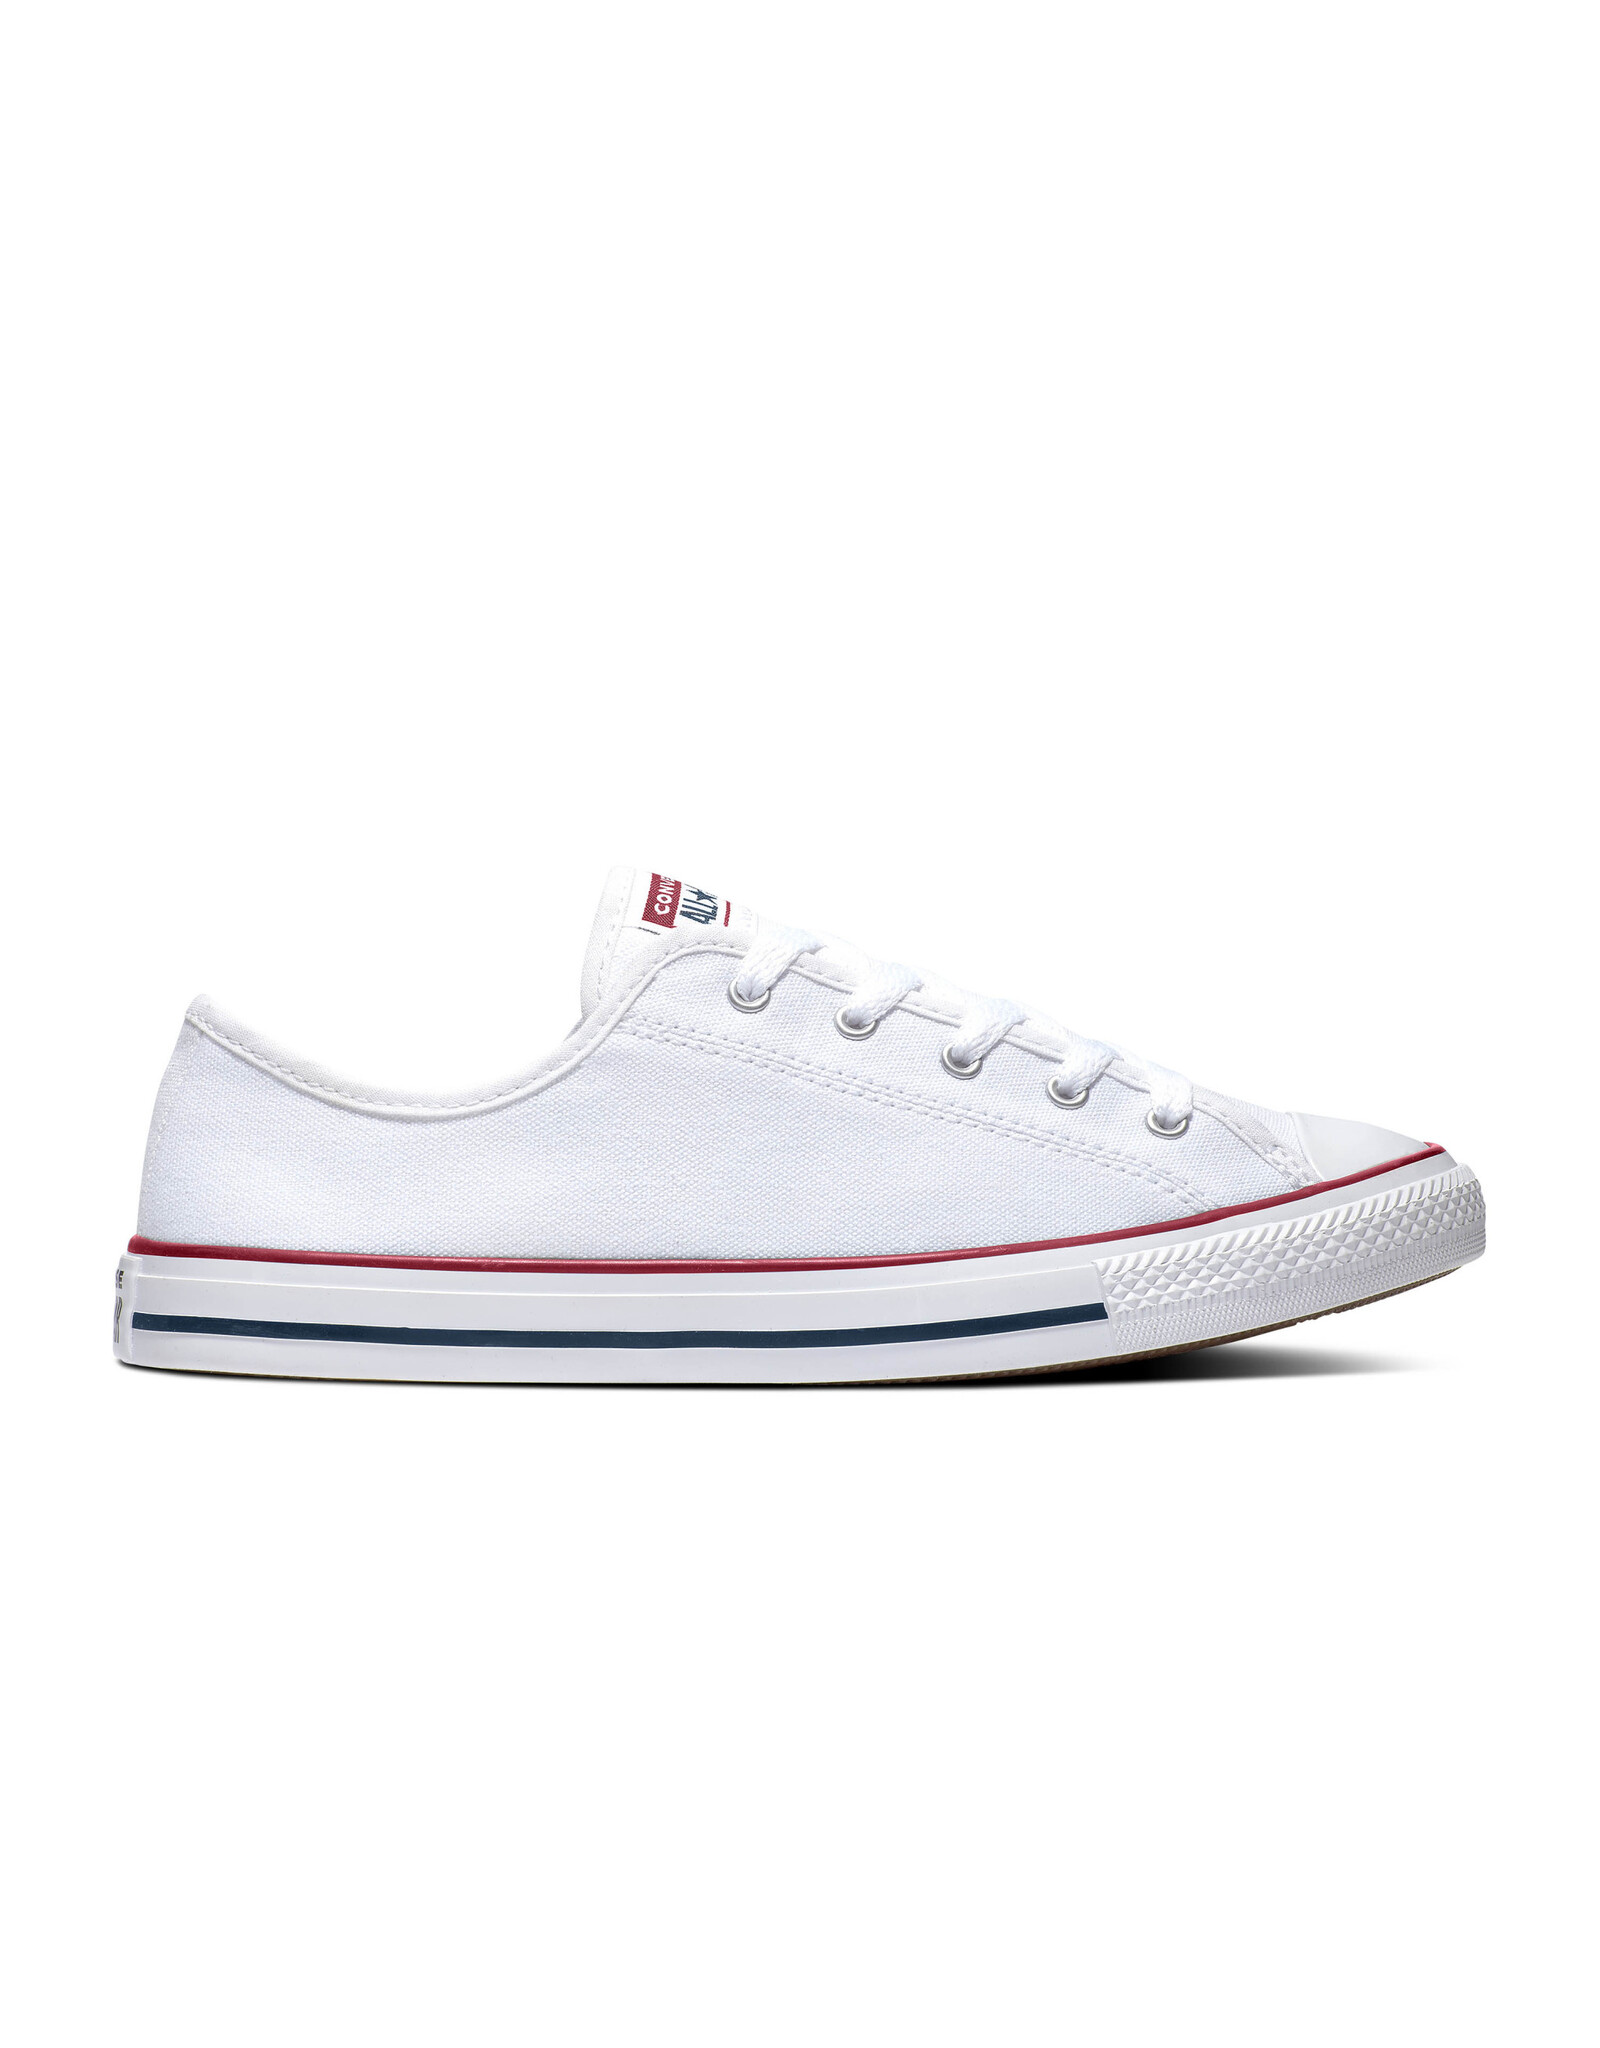 CHUCK TAYLOR ALL STAR DAINTY OX WHITE/RED/BLUE C940W-564981C